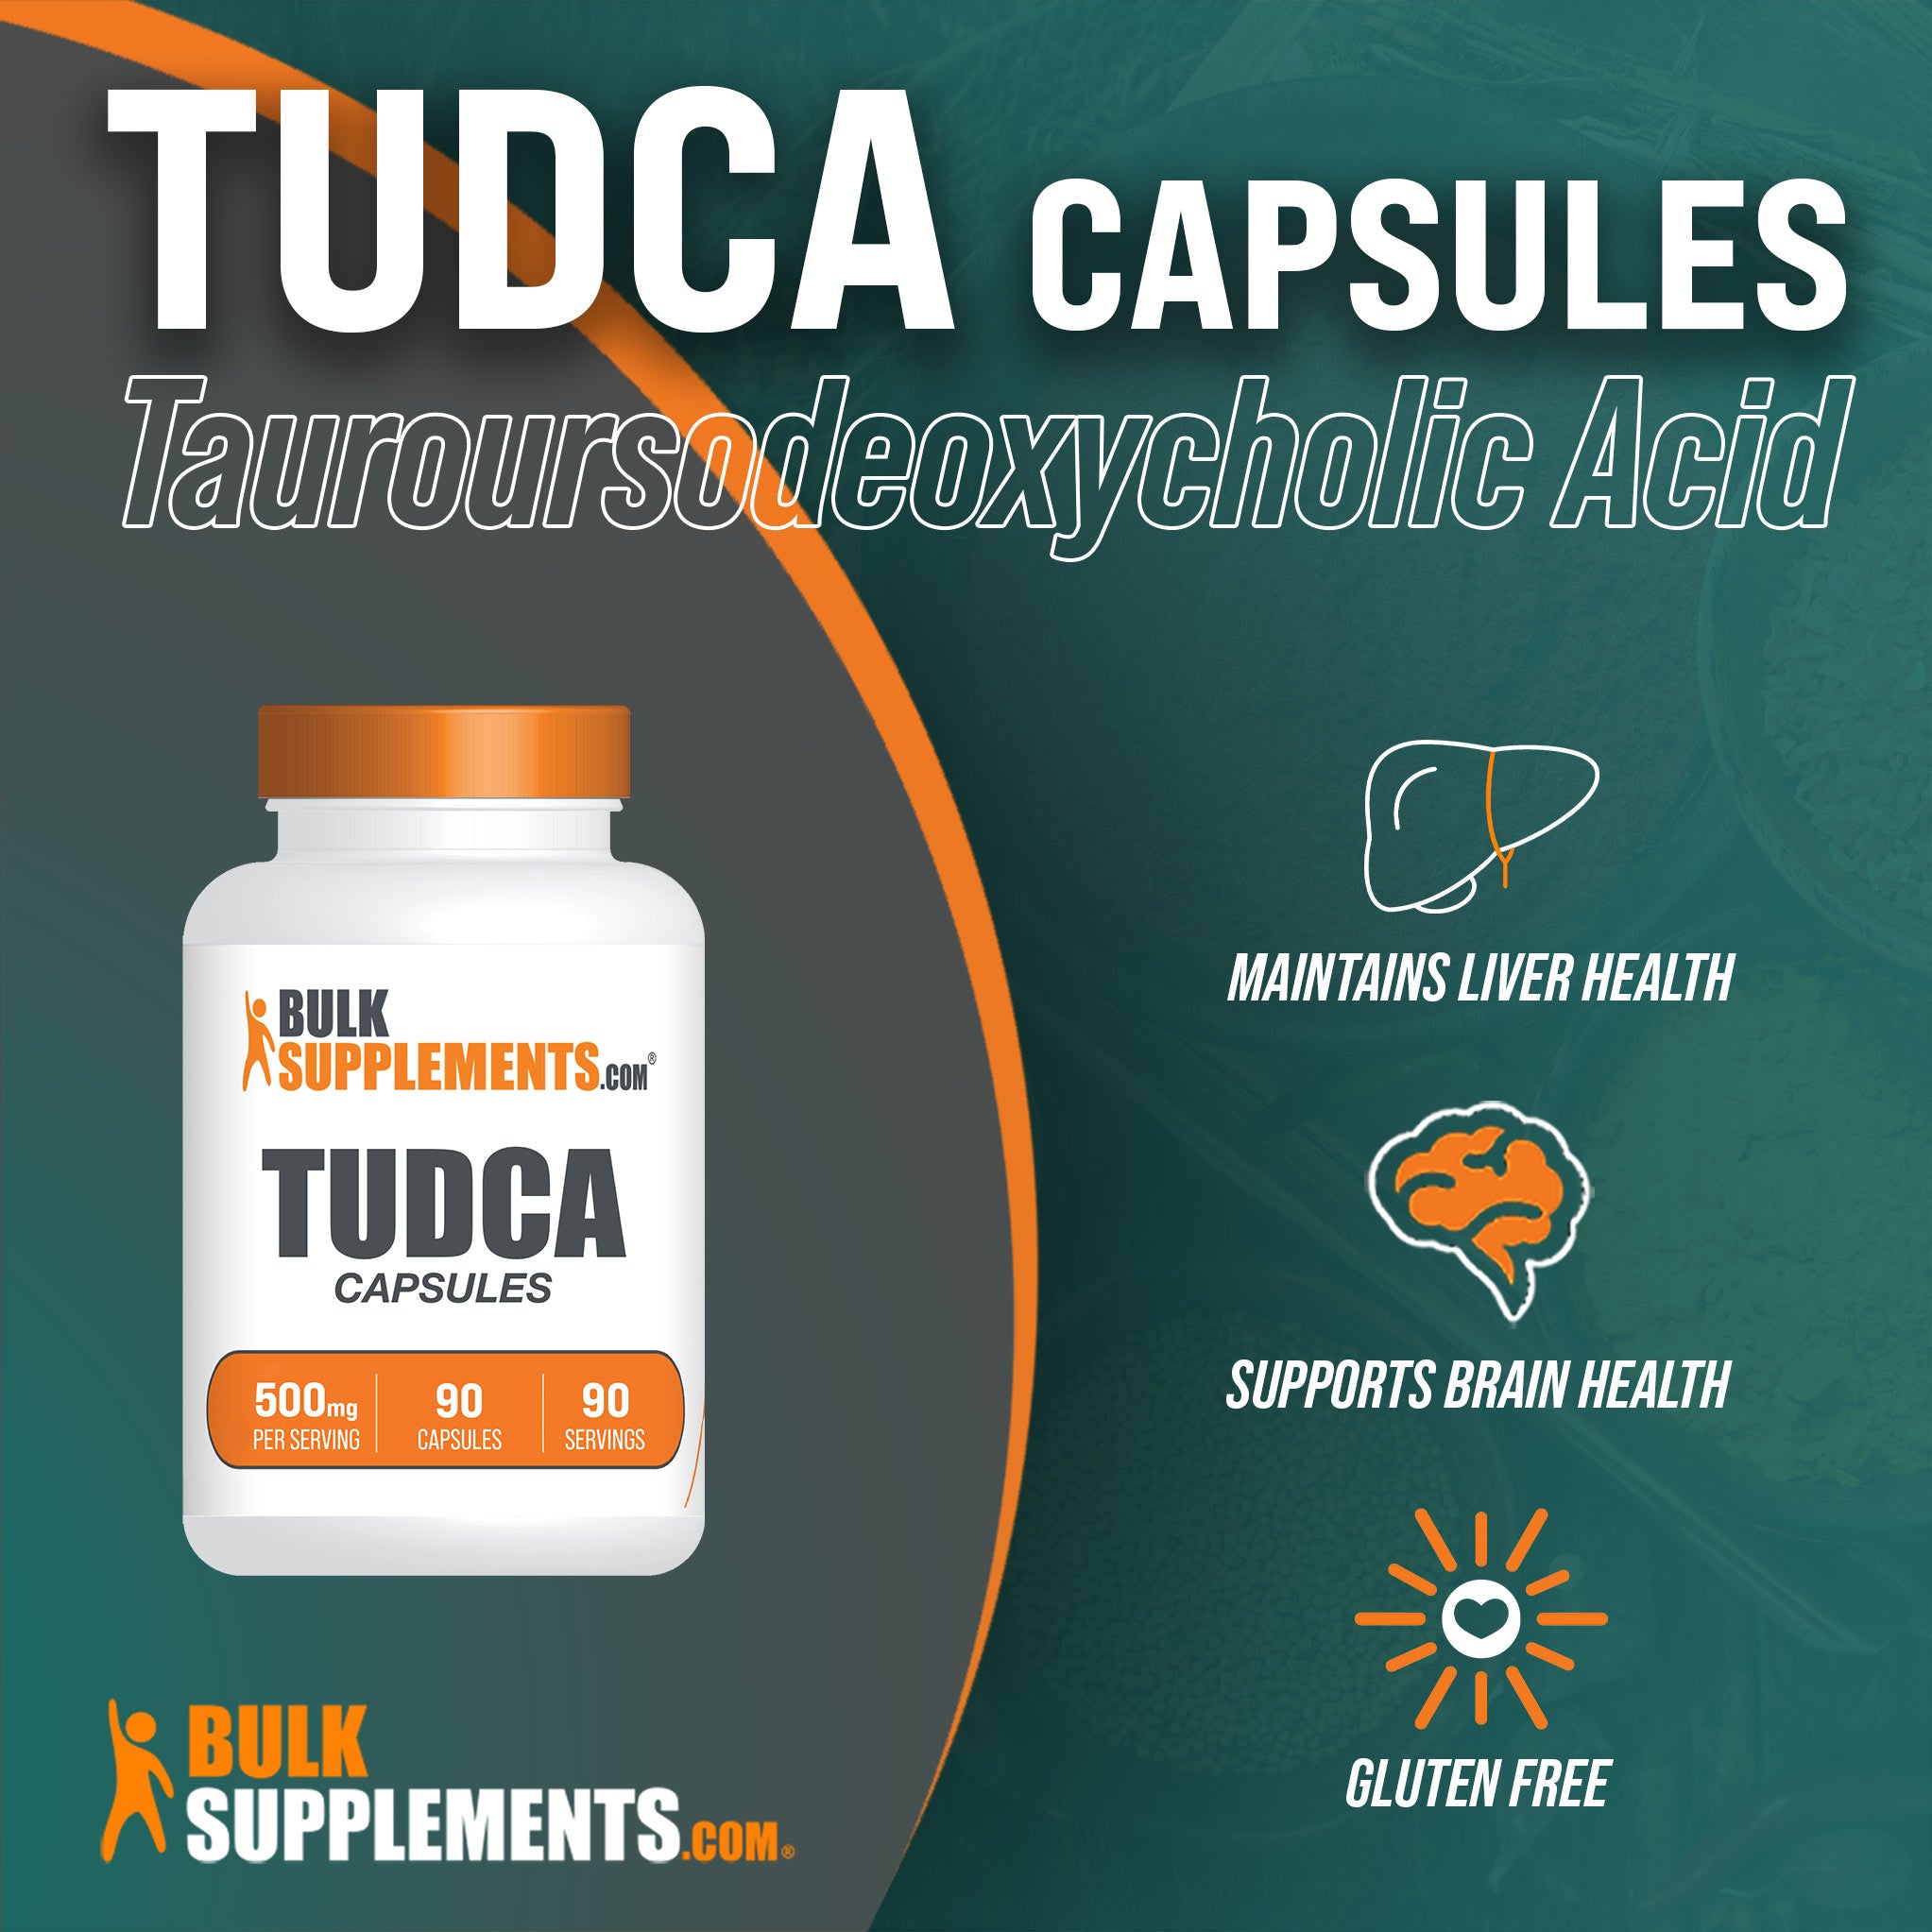 Benefits of TUDCA Capsules: maintains liver health, supports brain health, gluten free